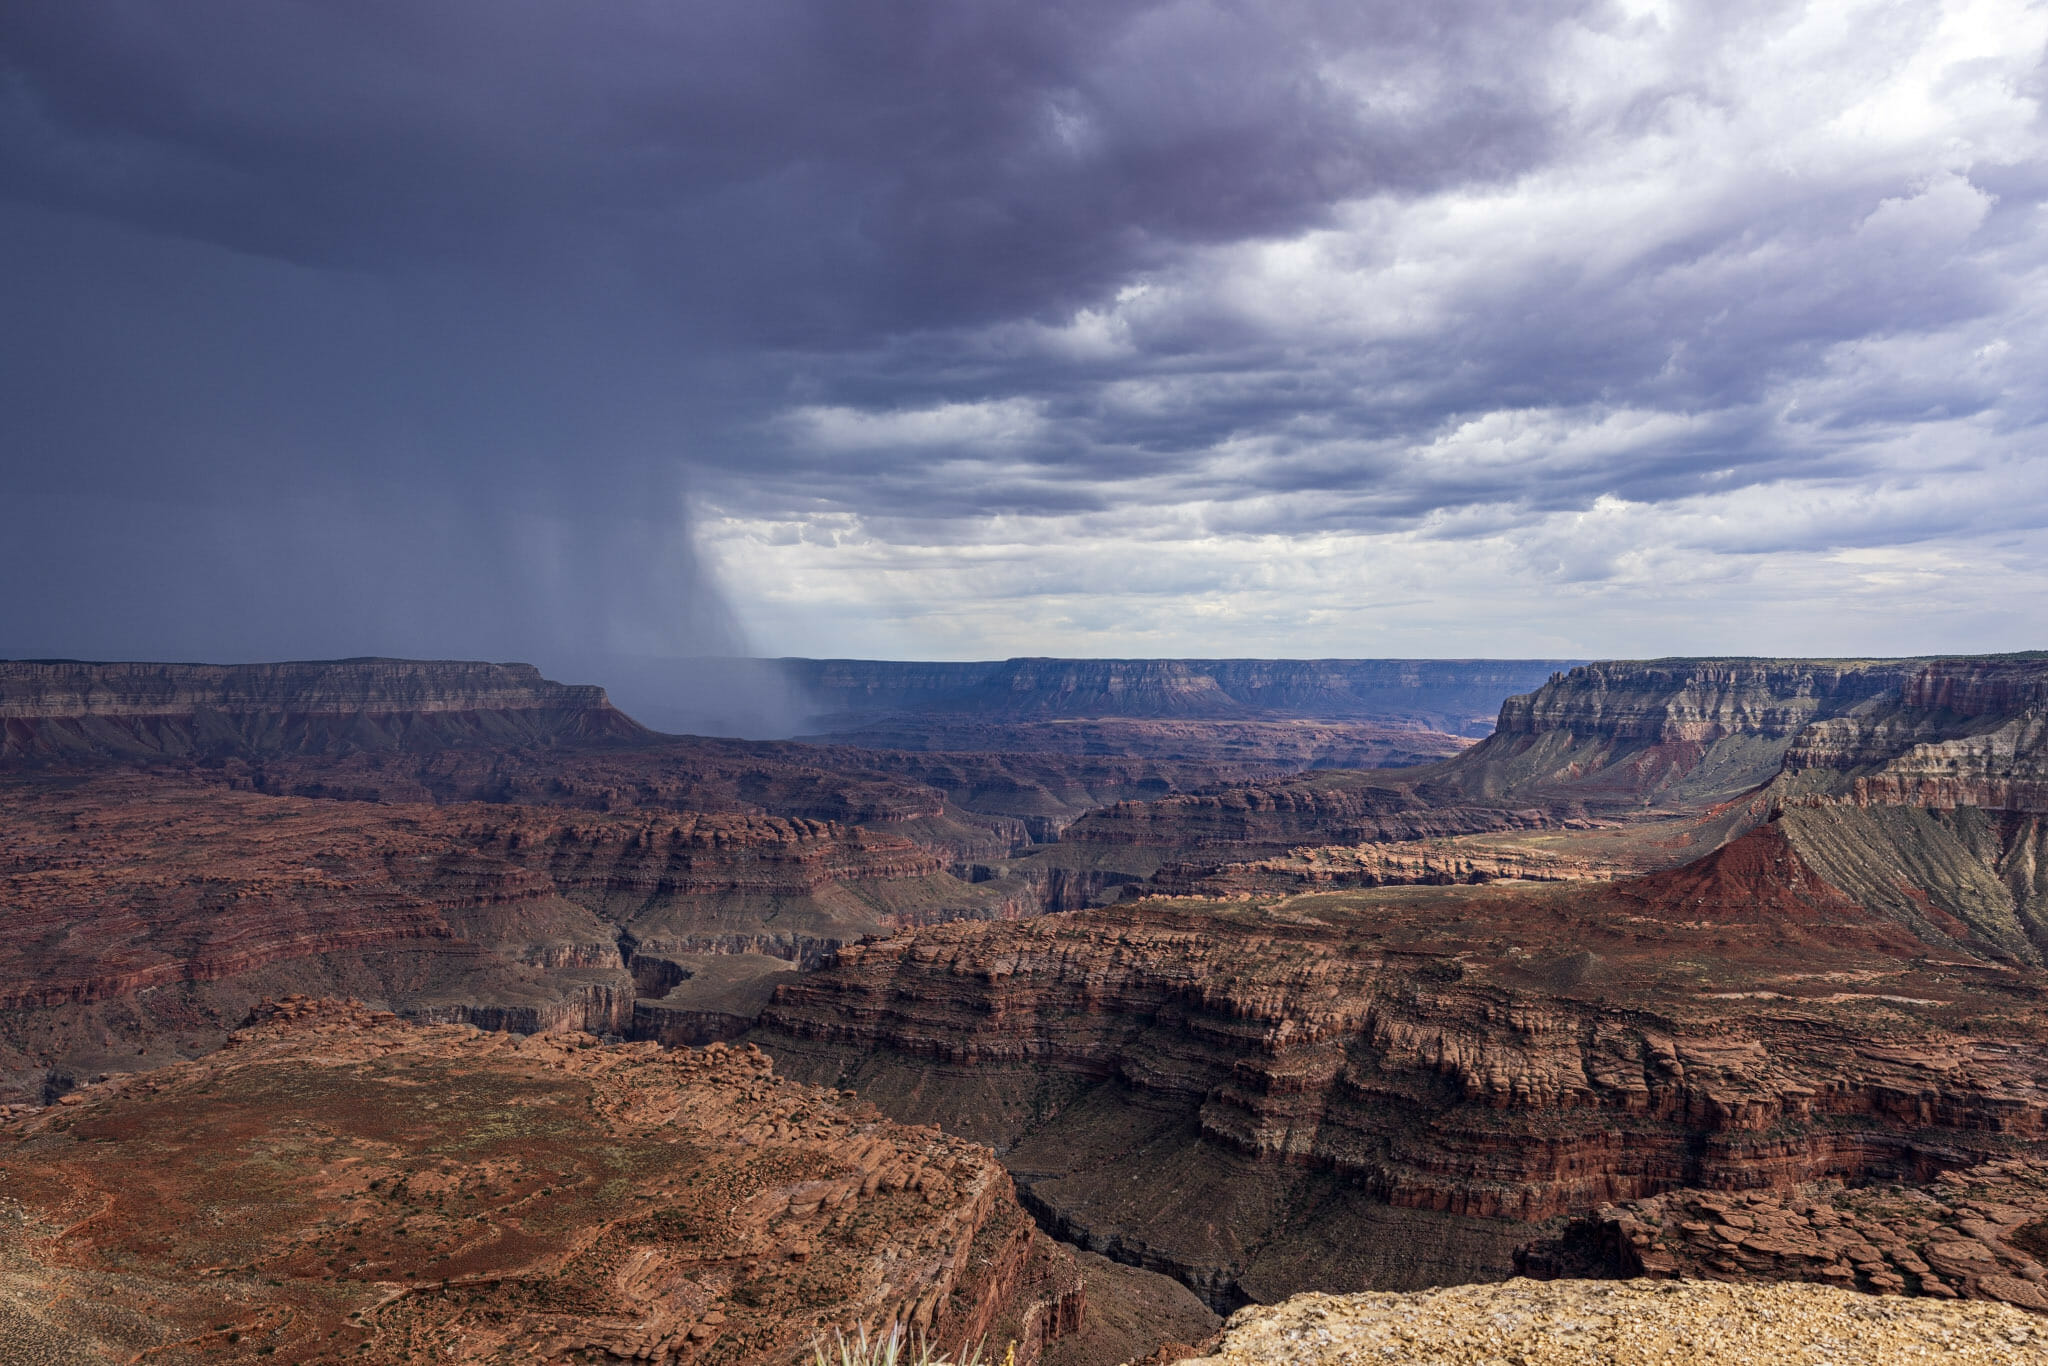 A wide view Multi-colored levels of the Grand Canyon with rain coming in from the left